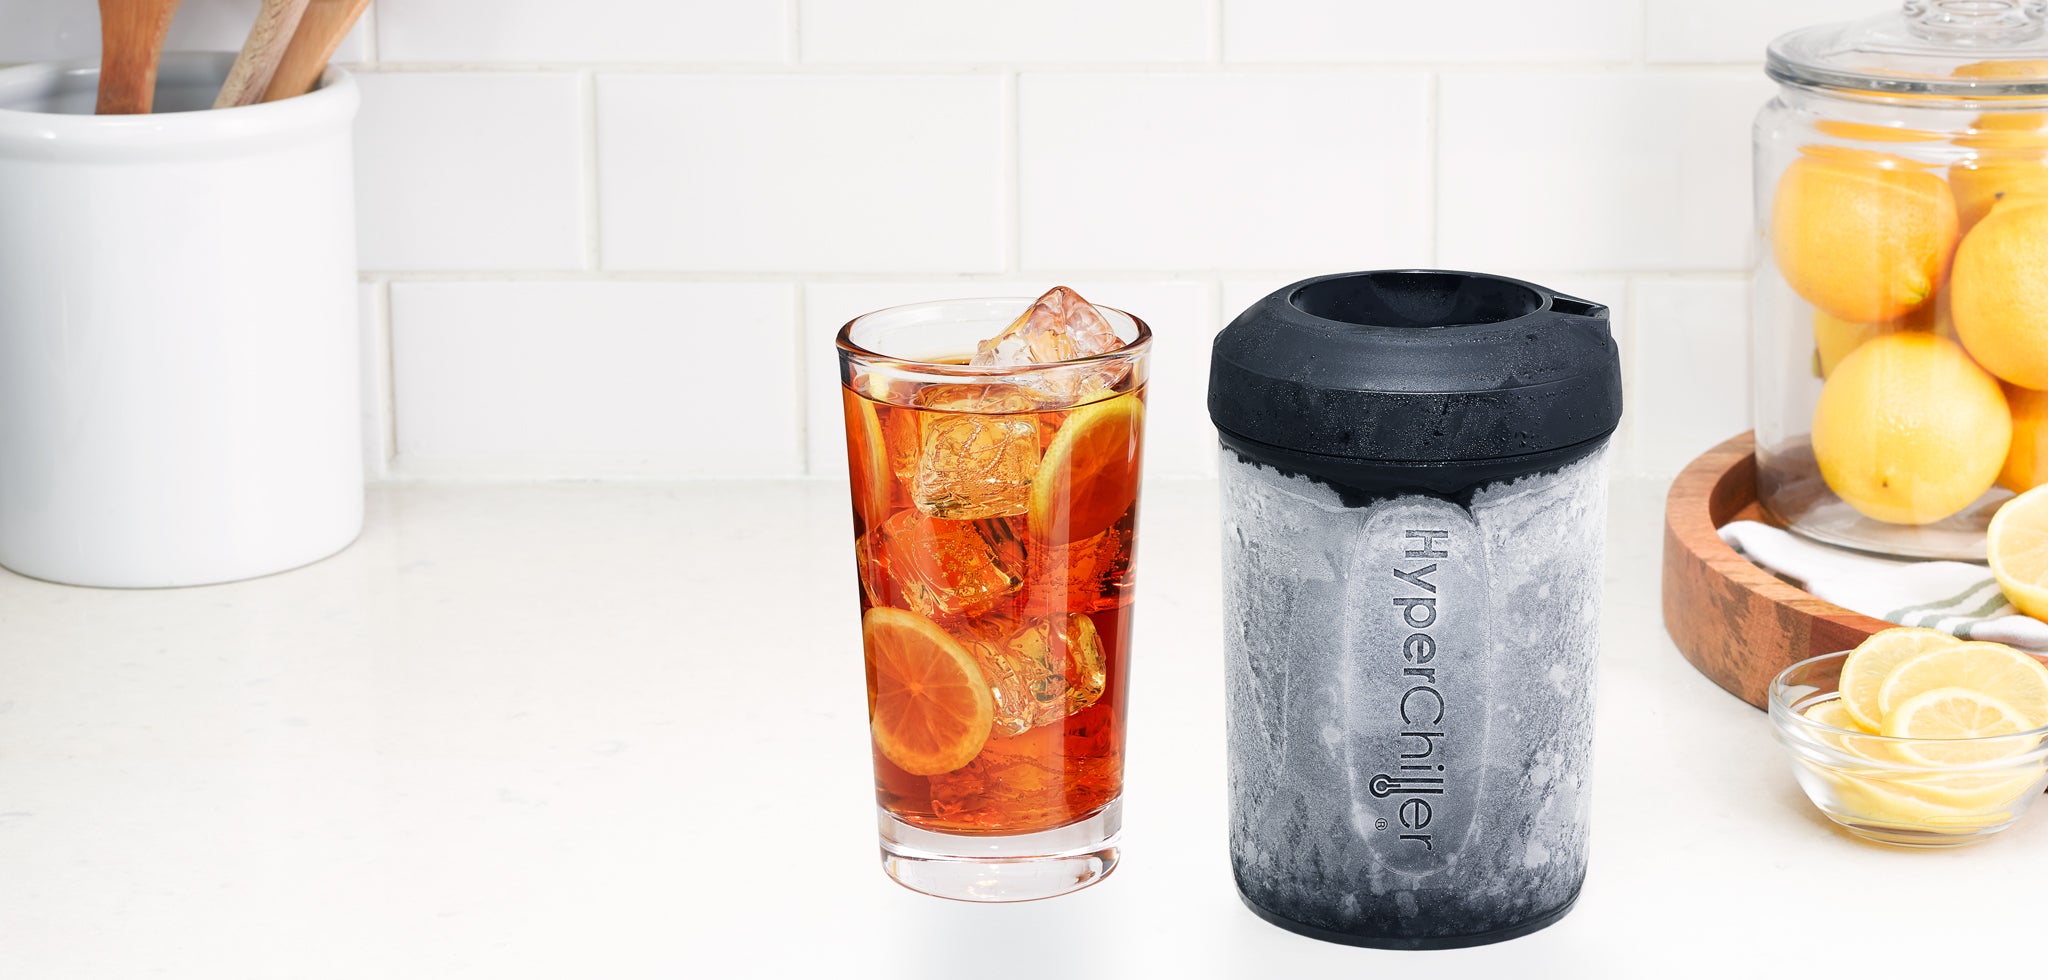  HyperChiller HC1 Patented Iced Coffee/Beverage Cooler